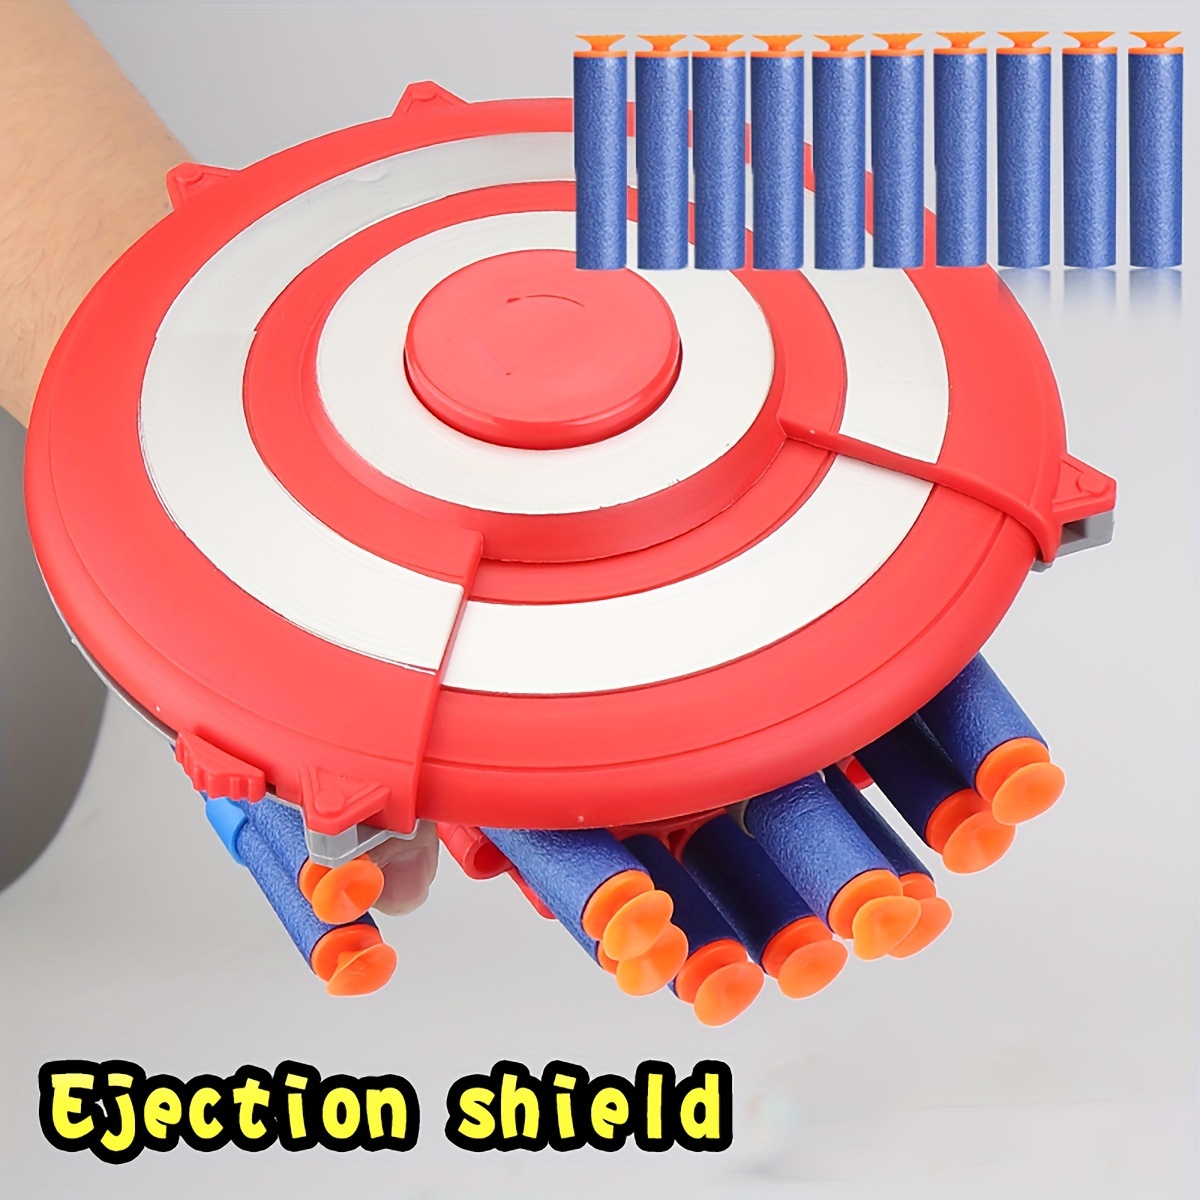 

1 Set New Shield Type Soft Missile Launcher Toy Set, Creative Children's Diy Role Play Outdoor Interactive Shooting Game Toy Set, Halloween/christmas/birthday/new Year Festival Gift